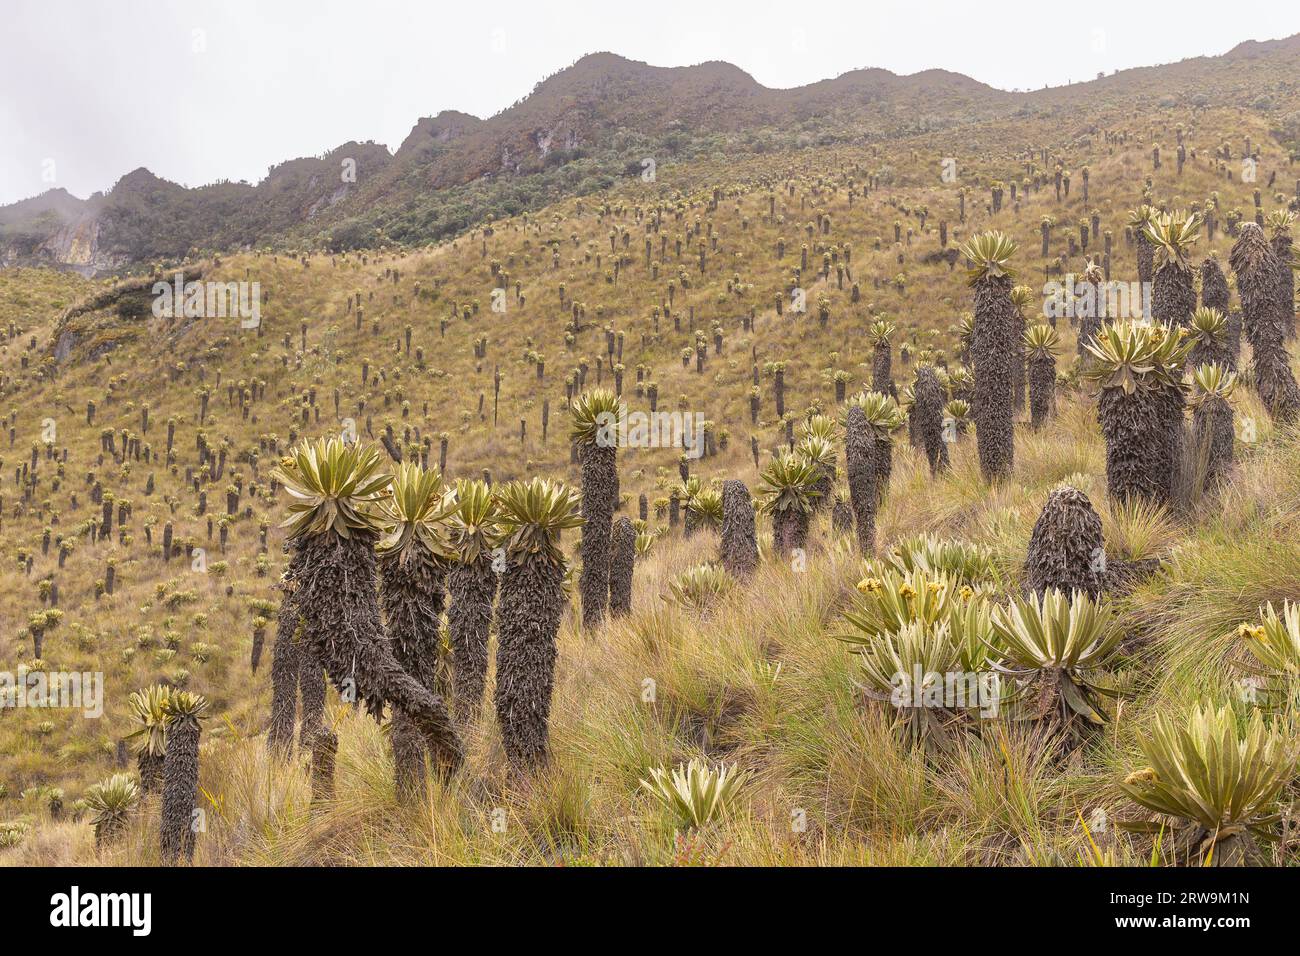 Landscape of the paramo ecosystem in the Andes of Colombia, South America. Stock Photo